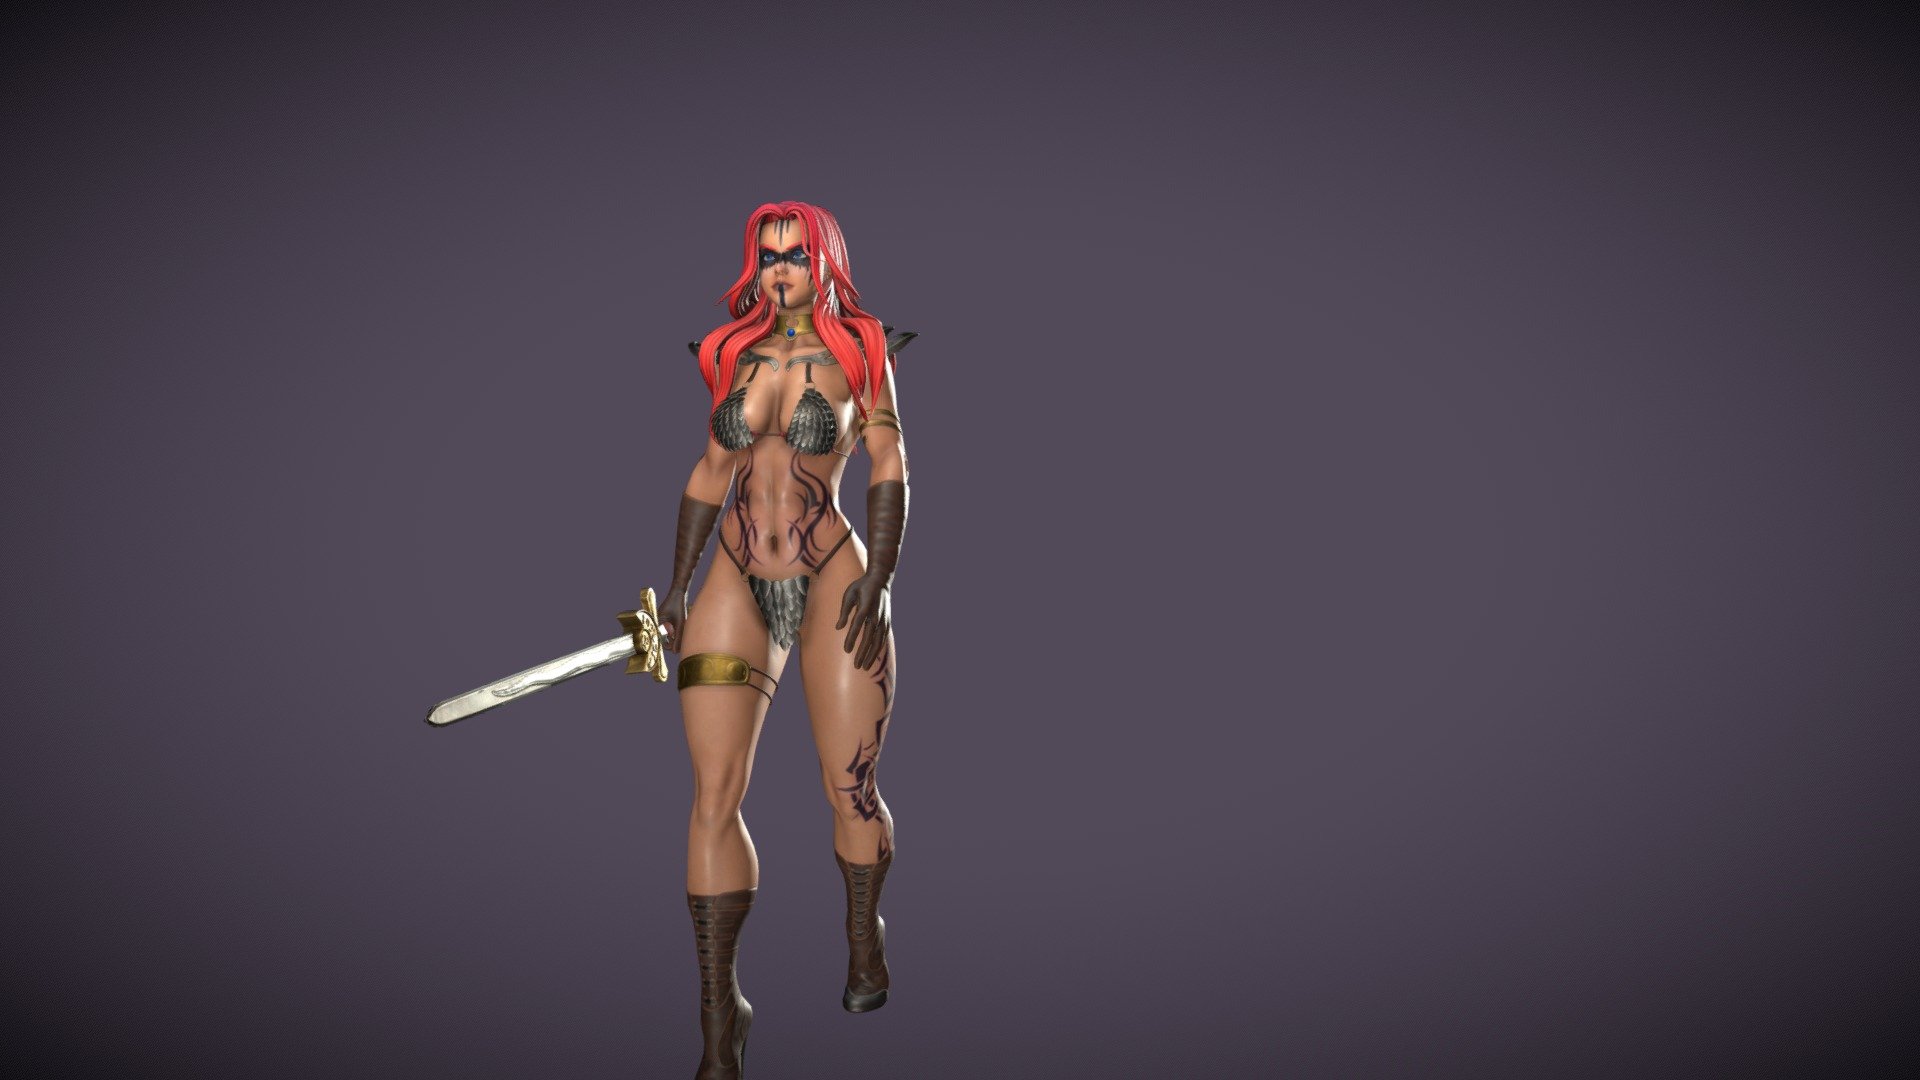 This is a model based on the character of the female warrior Red Sonja, created for Marvel Comics. 
I did time ago and now I want to share with you, hope you like it

https://www.artstation.com/artwork/mD4W91 - Red Sonja - 3D model by David_HT (@daher7) 3d model